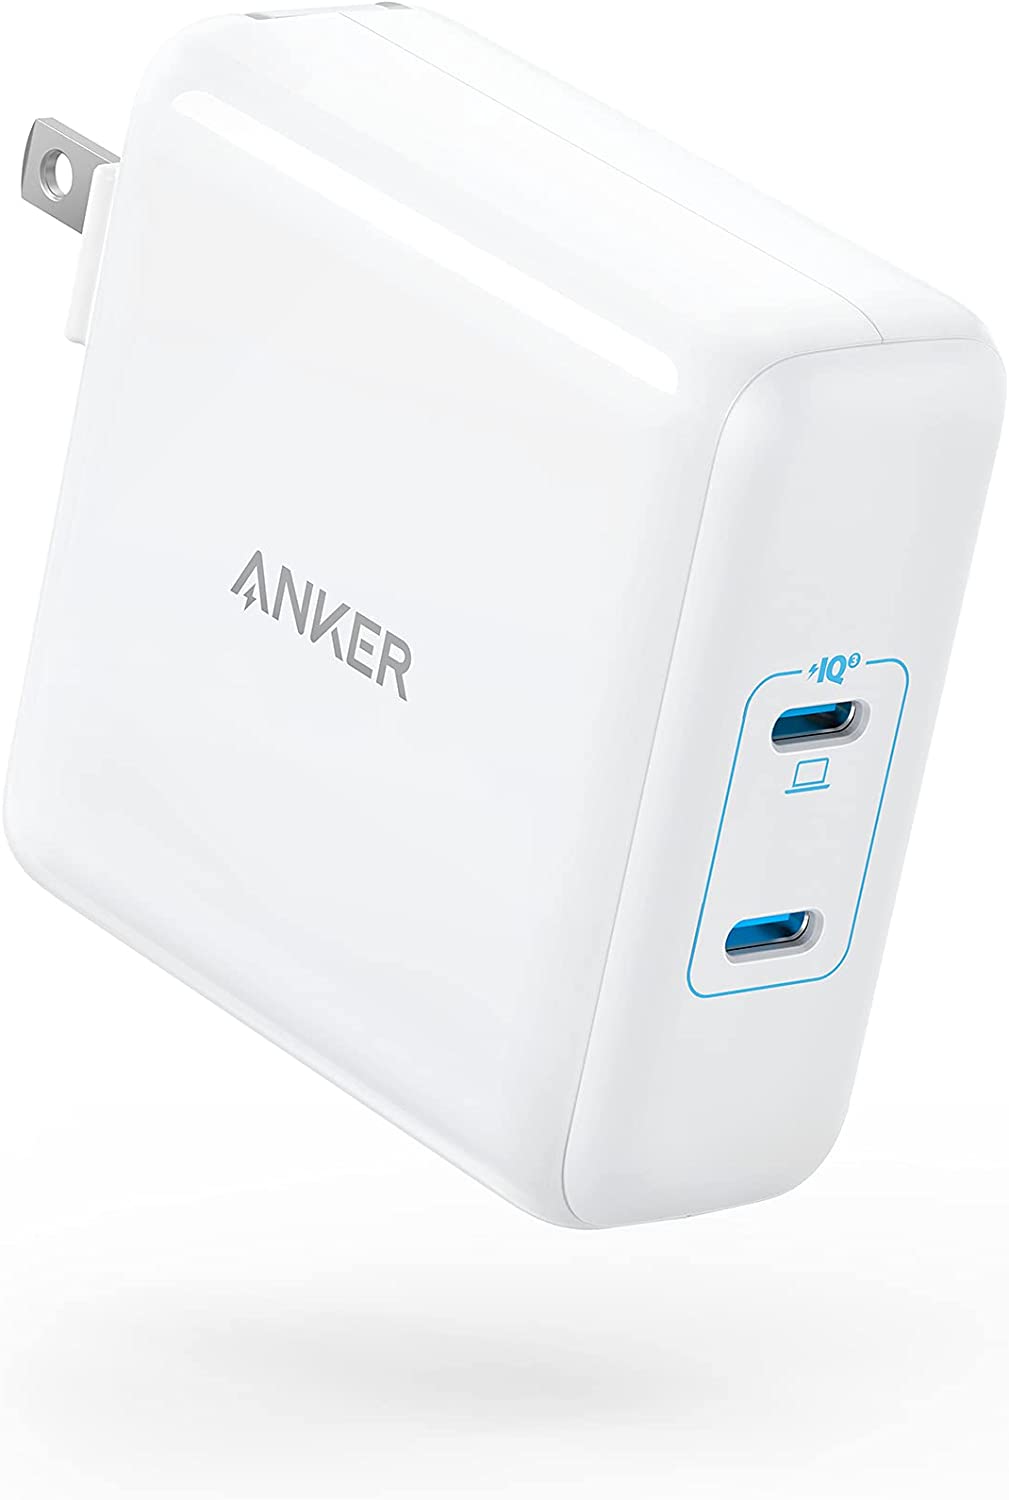 Prime Members: Anker 100W 2-Port USB C Charger, PowerPort III Charger PIQ 3.0 Ultra-Powerful Fast Charger $56 + Free Shipping